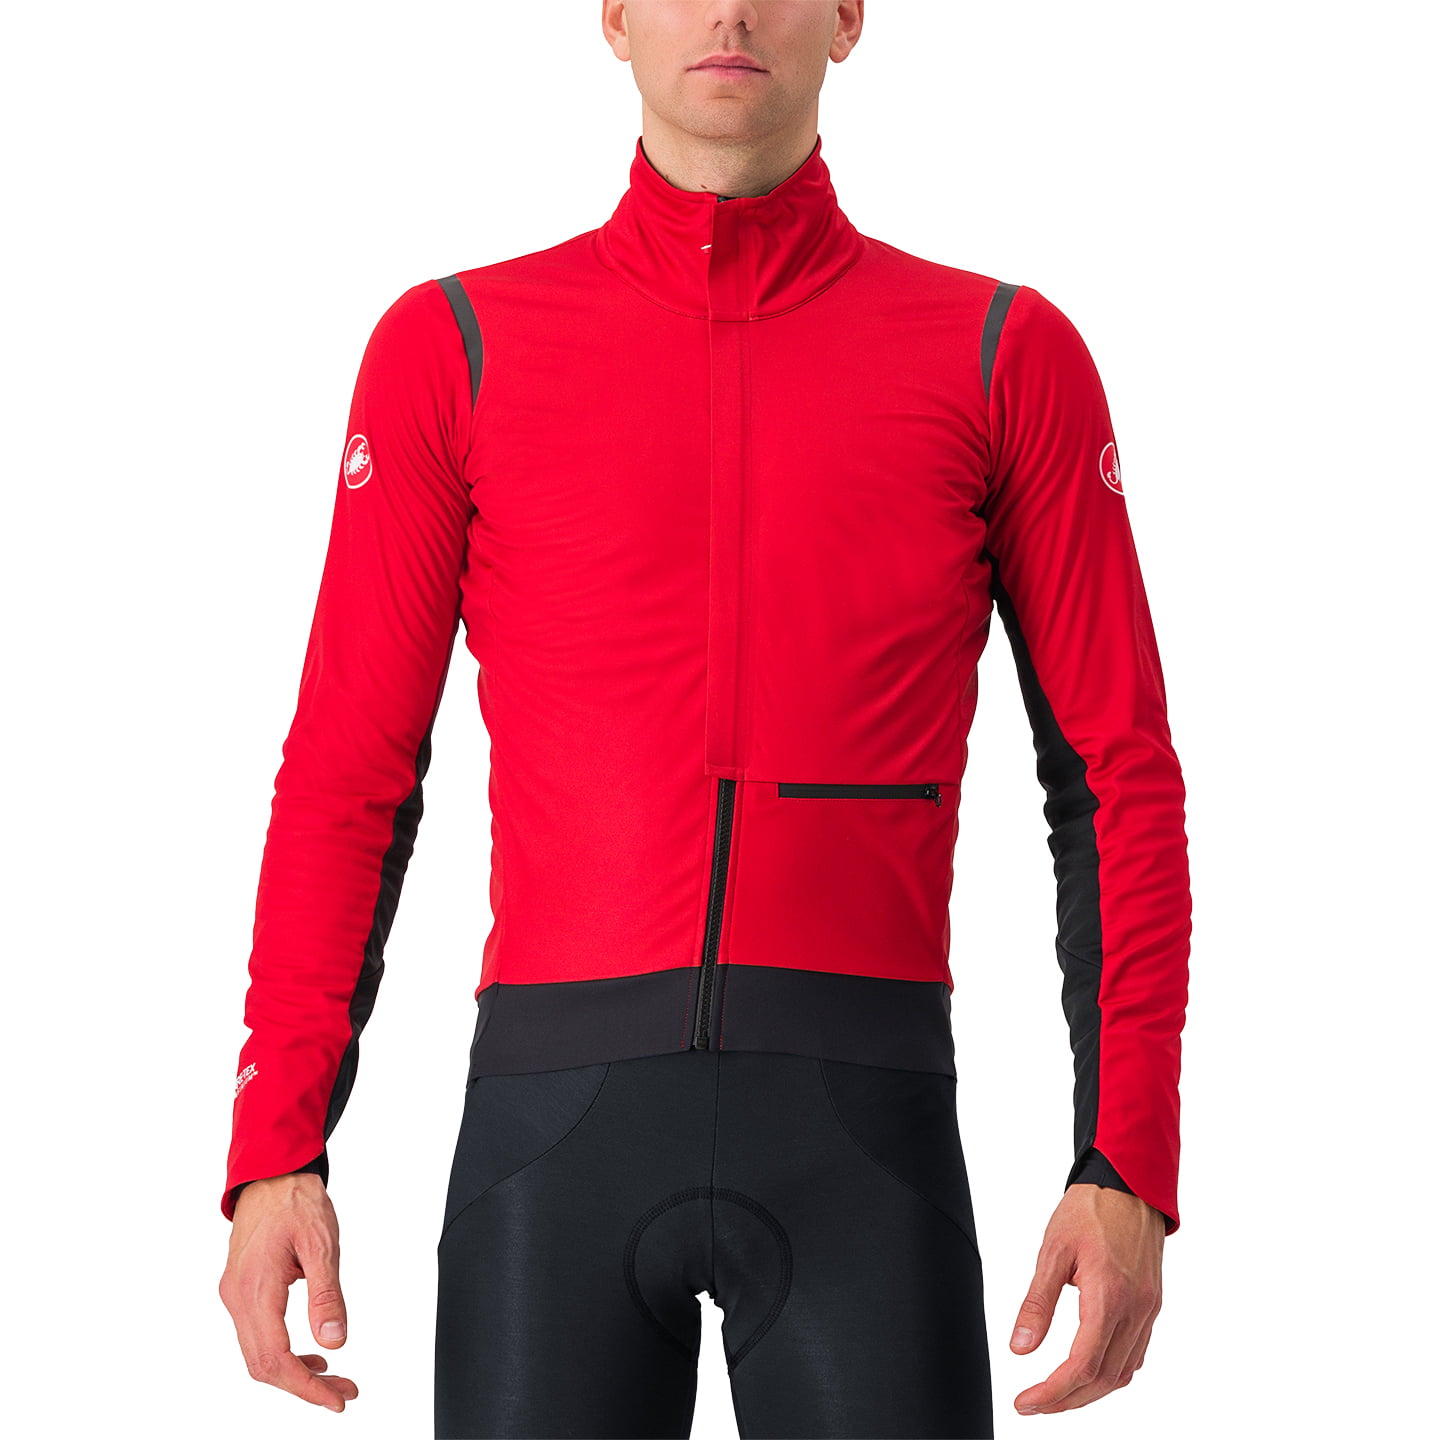 CASTELLI Winter Jacket Alpha Doppio RoS Thermal Jacket, for men, size 3XL, Cycle jacket, Cycling gear